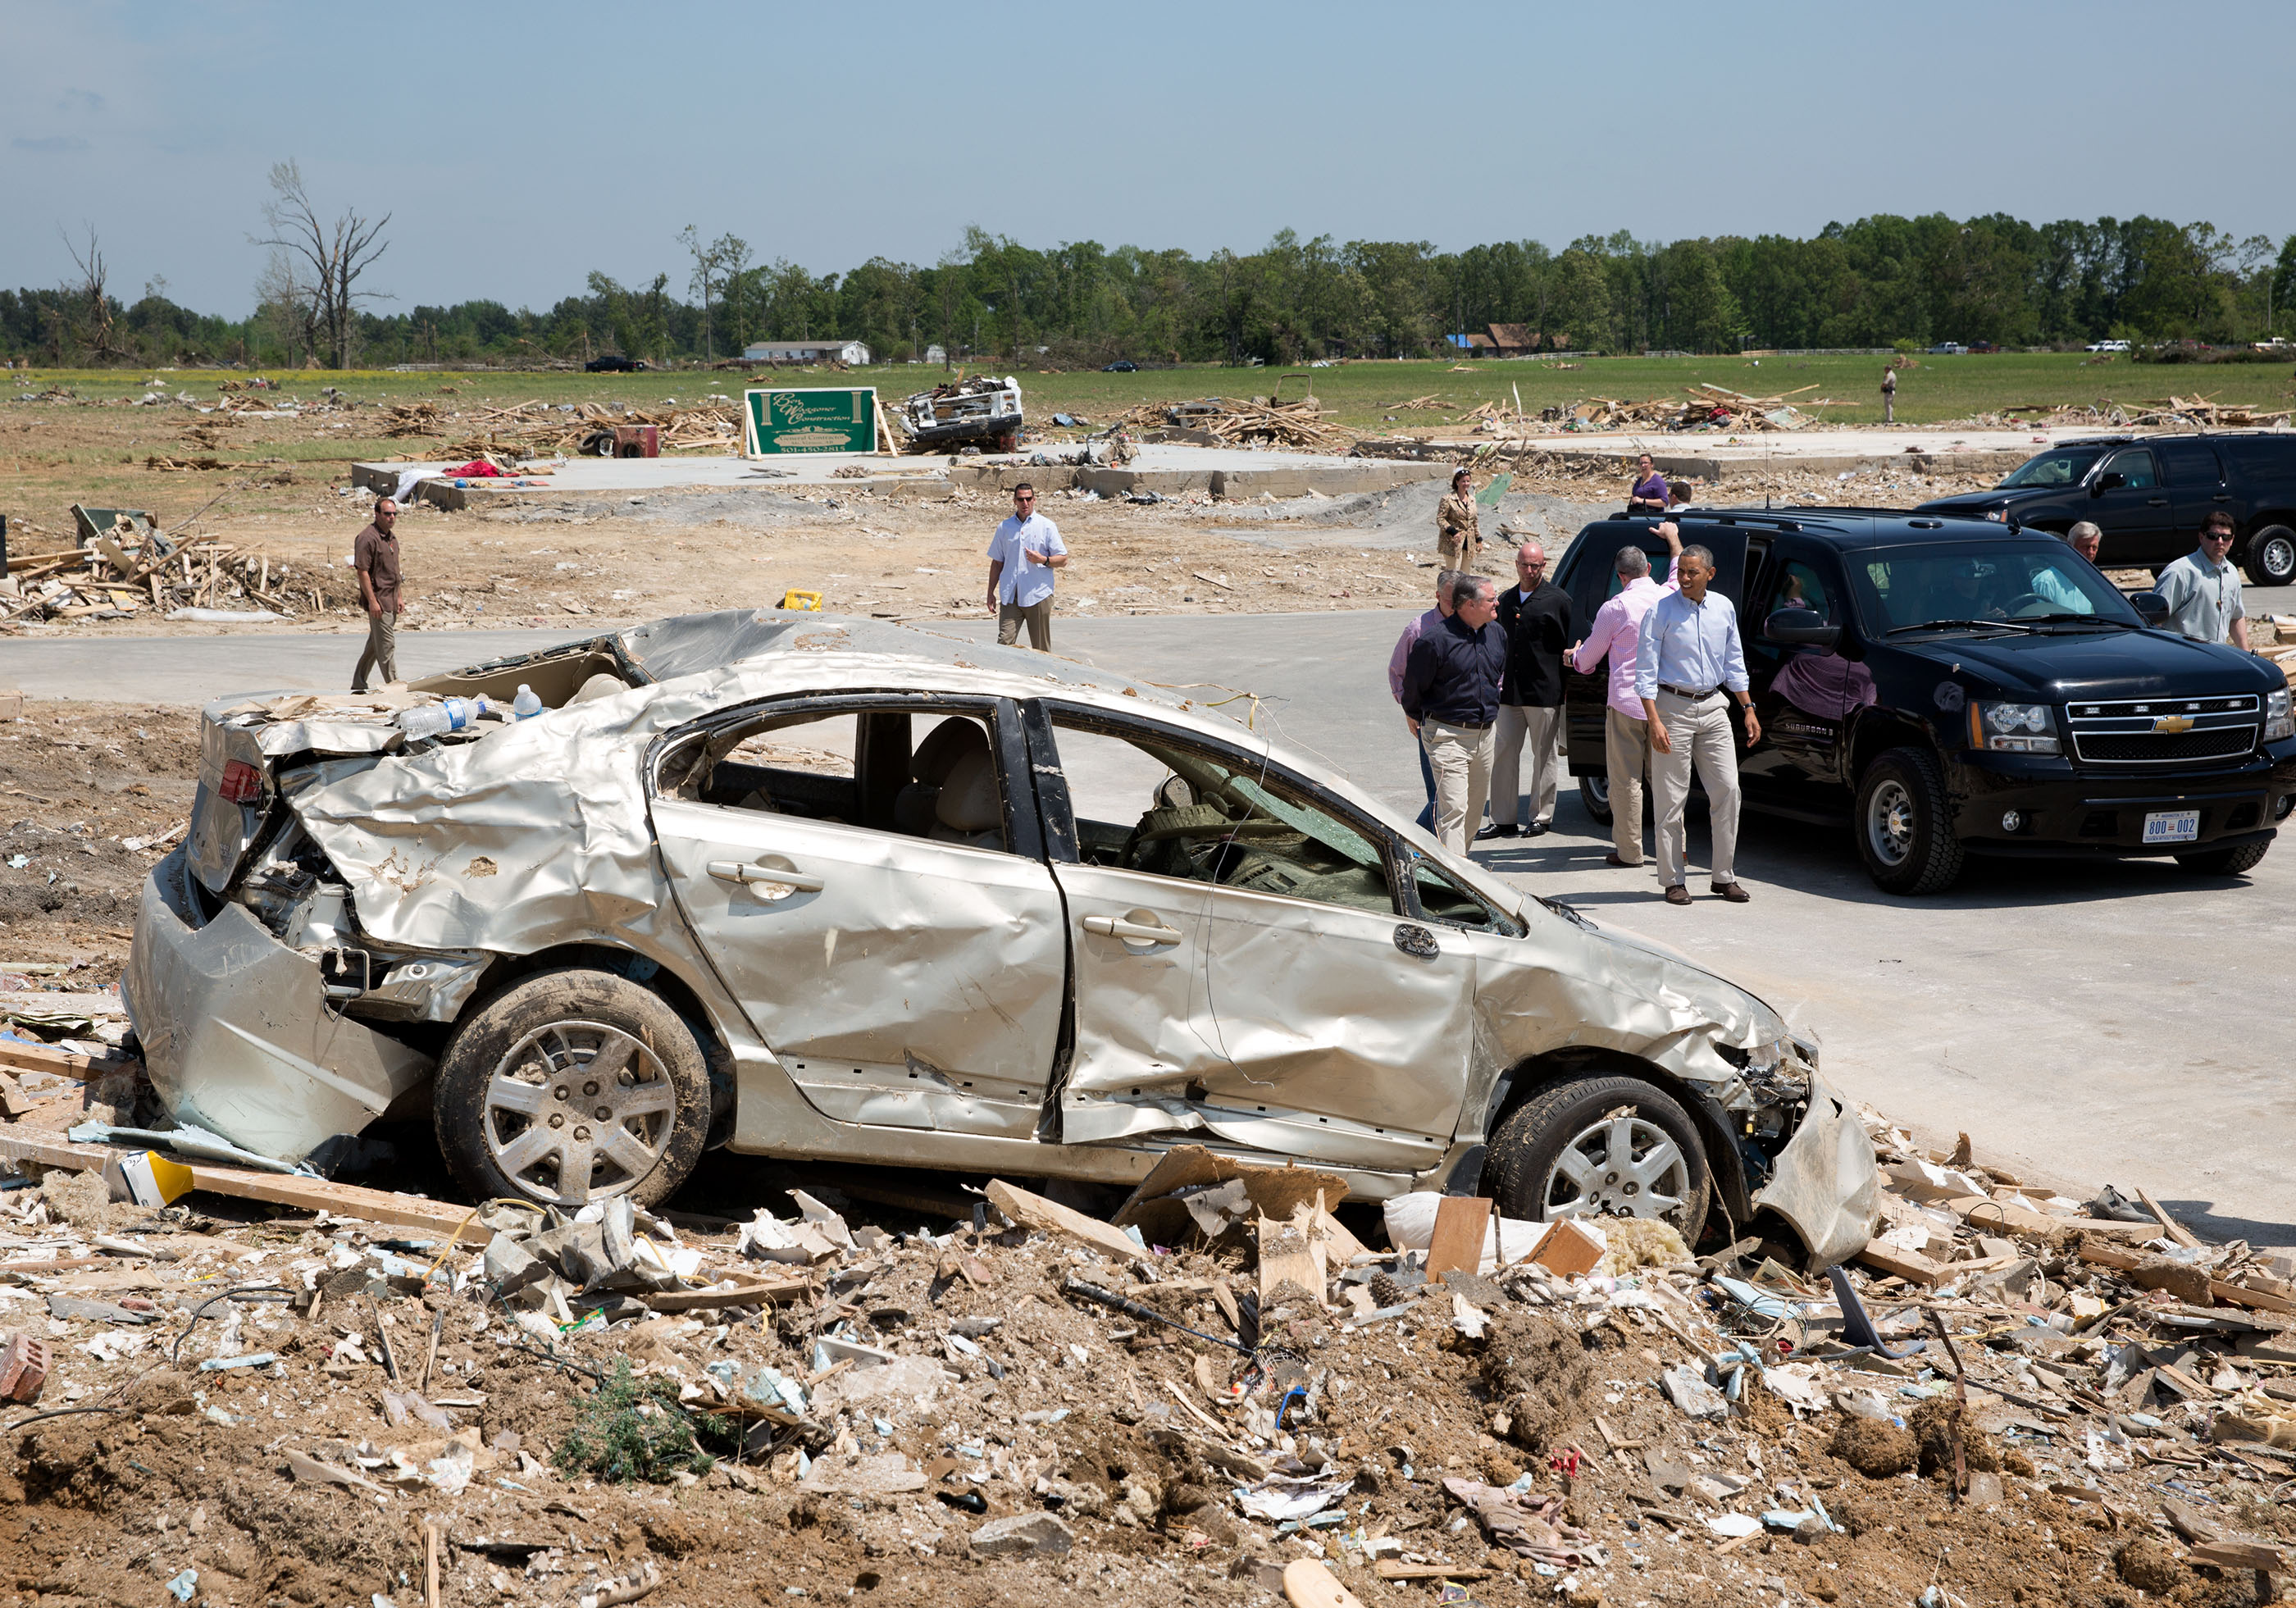 Arkansas. May 7, 2014. Touring tornado damage in Vilonia. (Official White House Photo by Pete Souza)